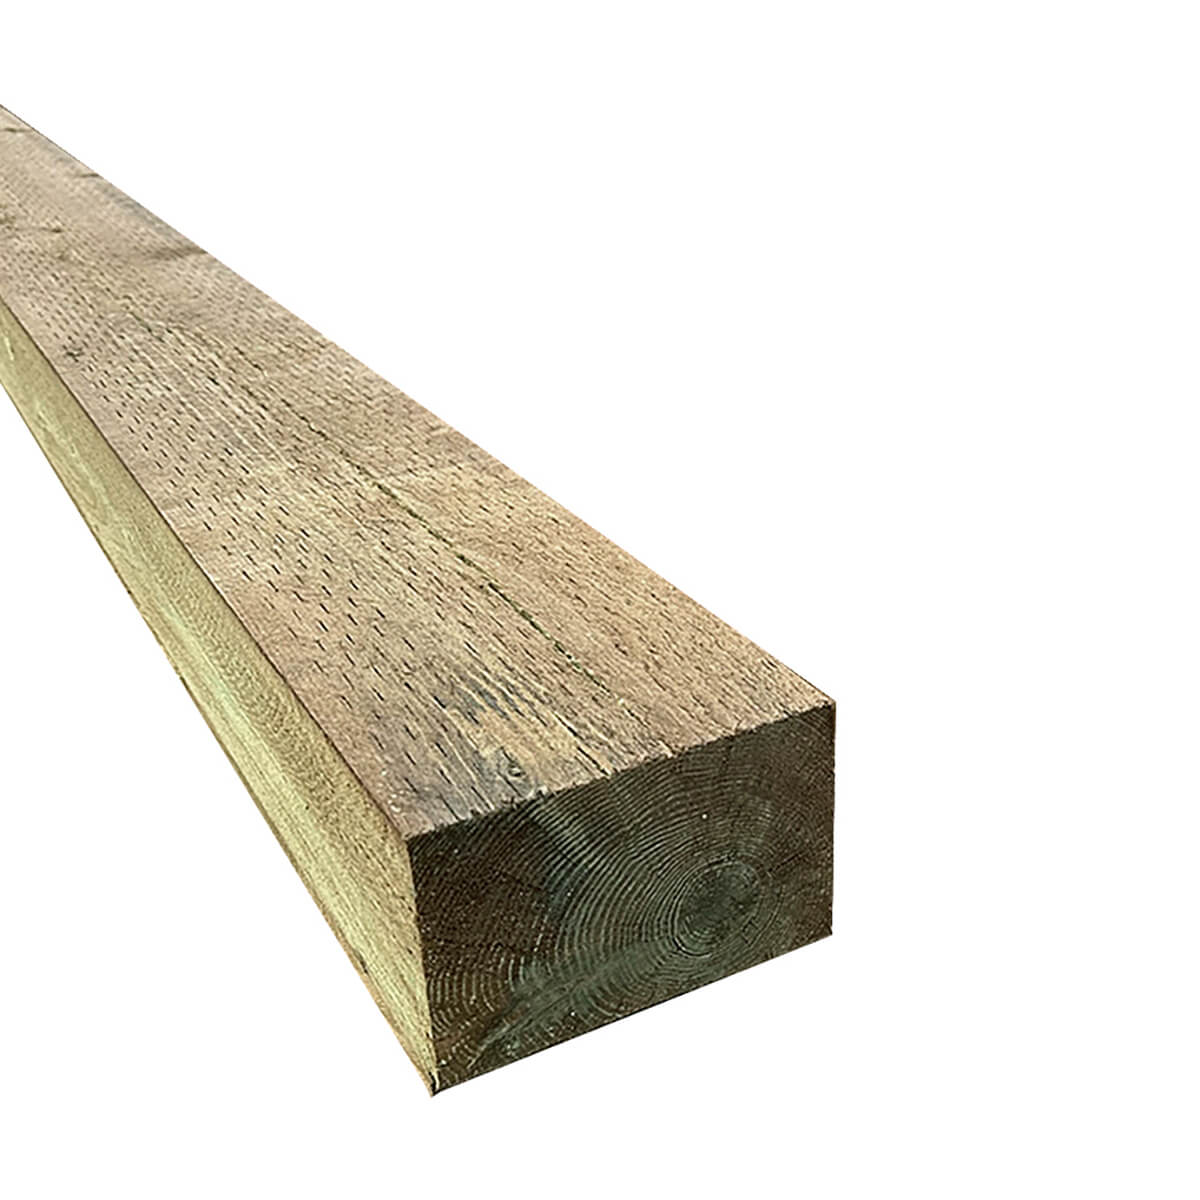 4X6X18-ft - Rough CCA Treated Timbers